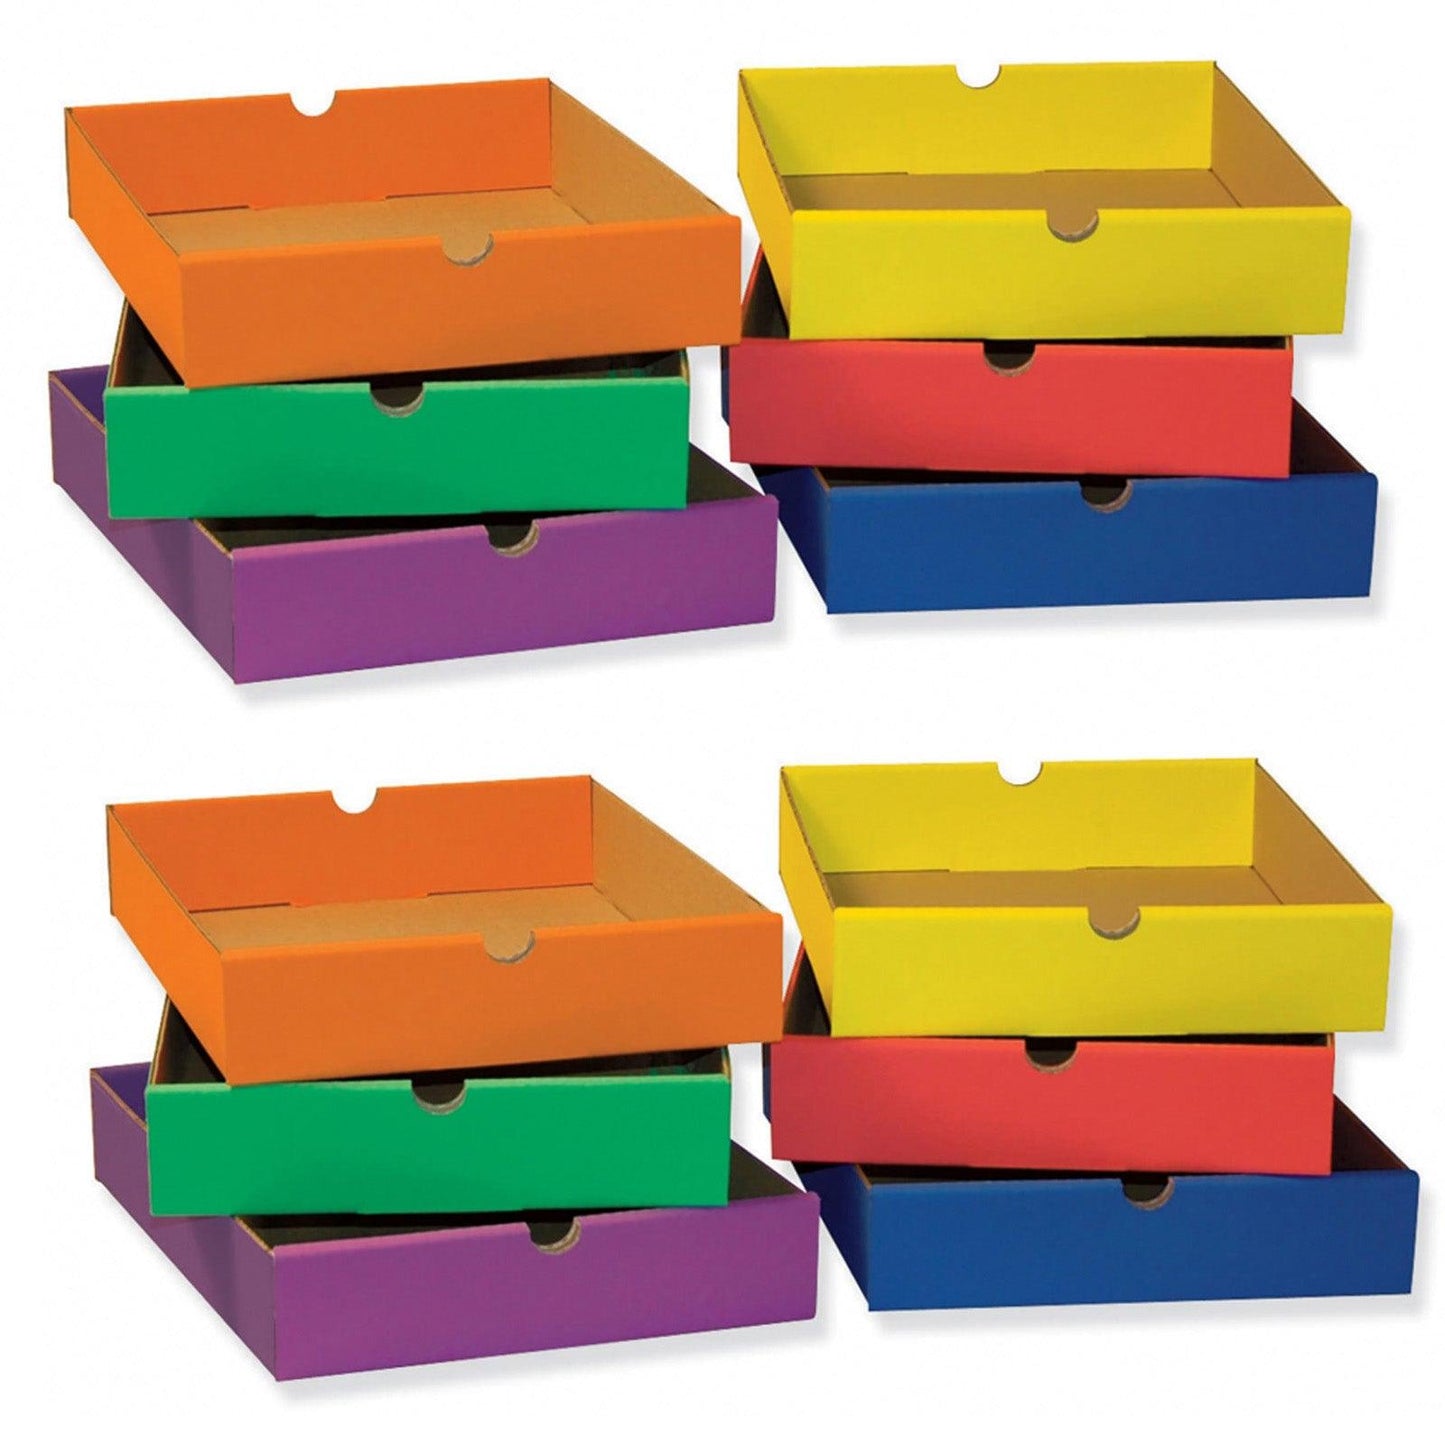 Drawers for 6-Shelf Organizer, 6 Assorted Colors, 2-1/2"H x 10-1/4"W x 13-1/4"D, 6 Drawers Per Set, 2 Sets - Loomini